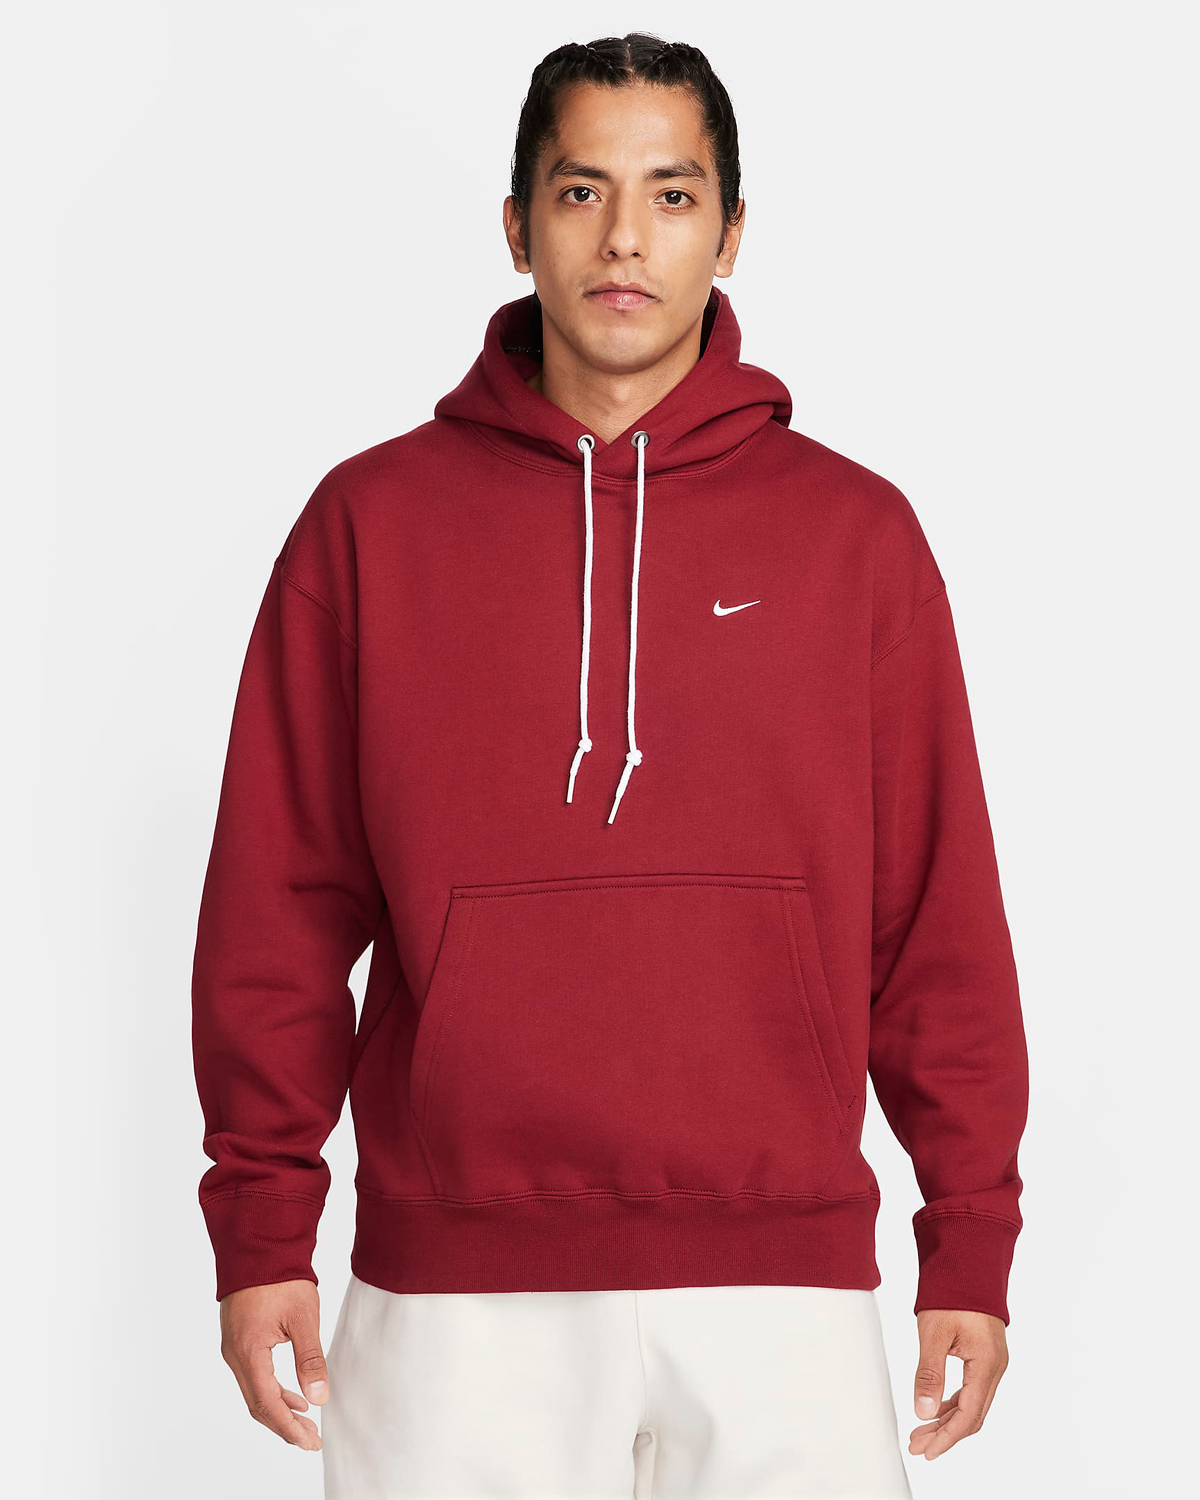 Nike Team Red Clothing Shirts Hoodies Pants Sneakers Outfits